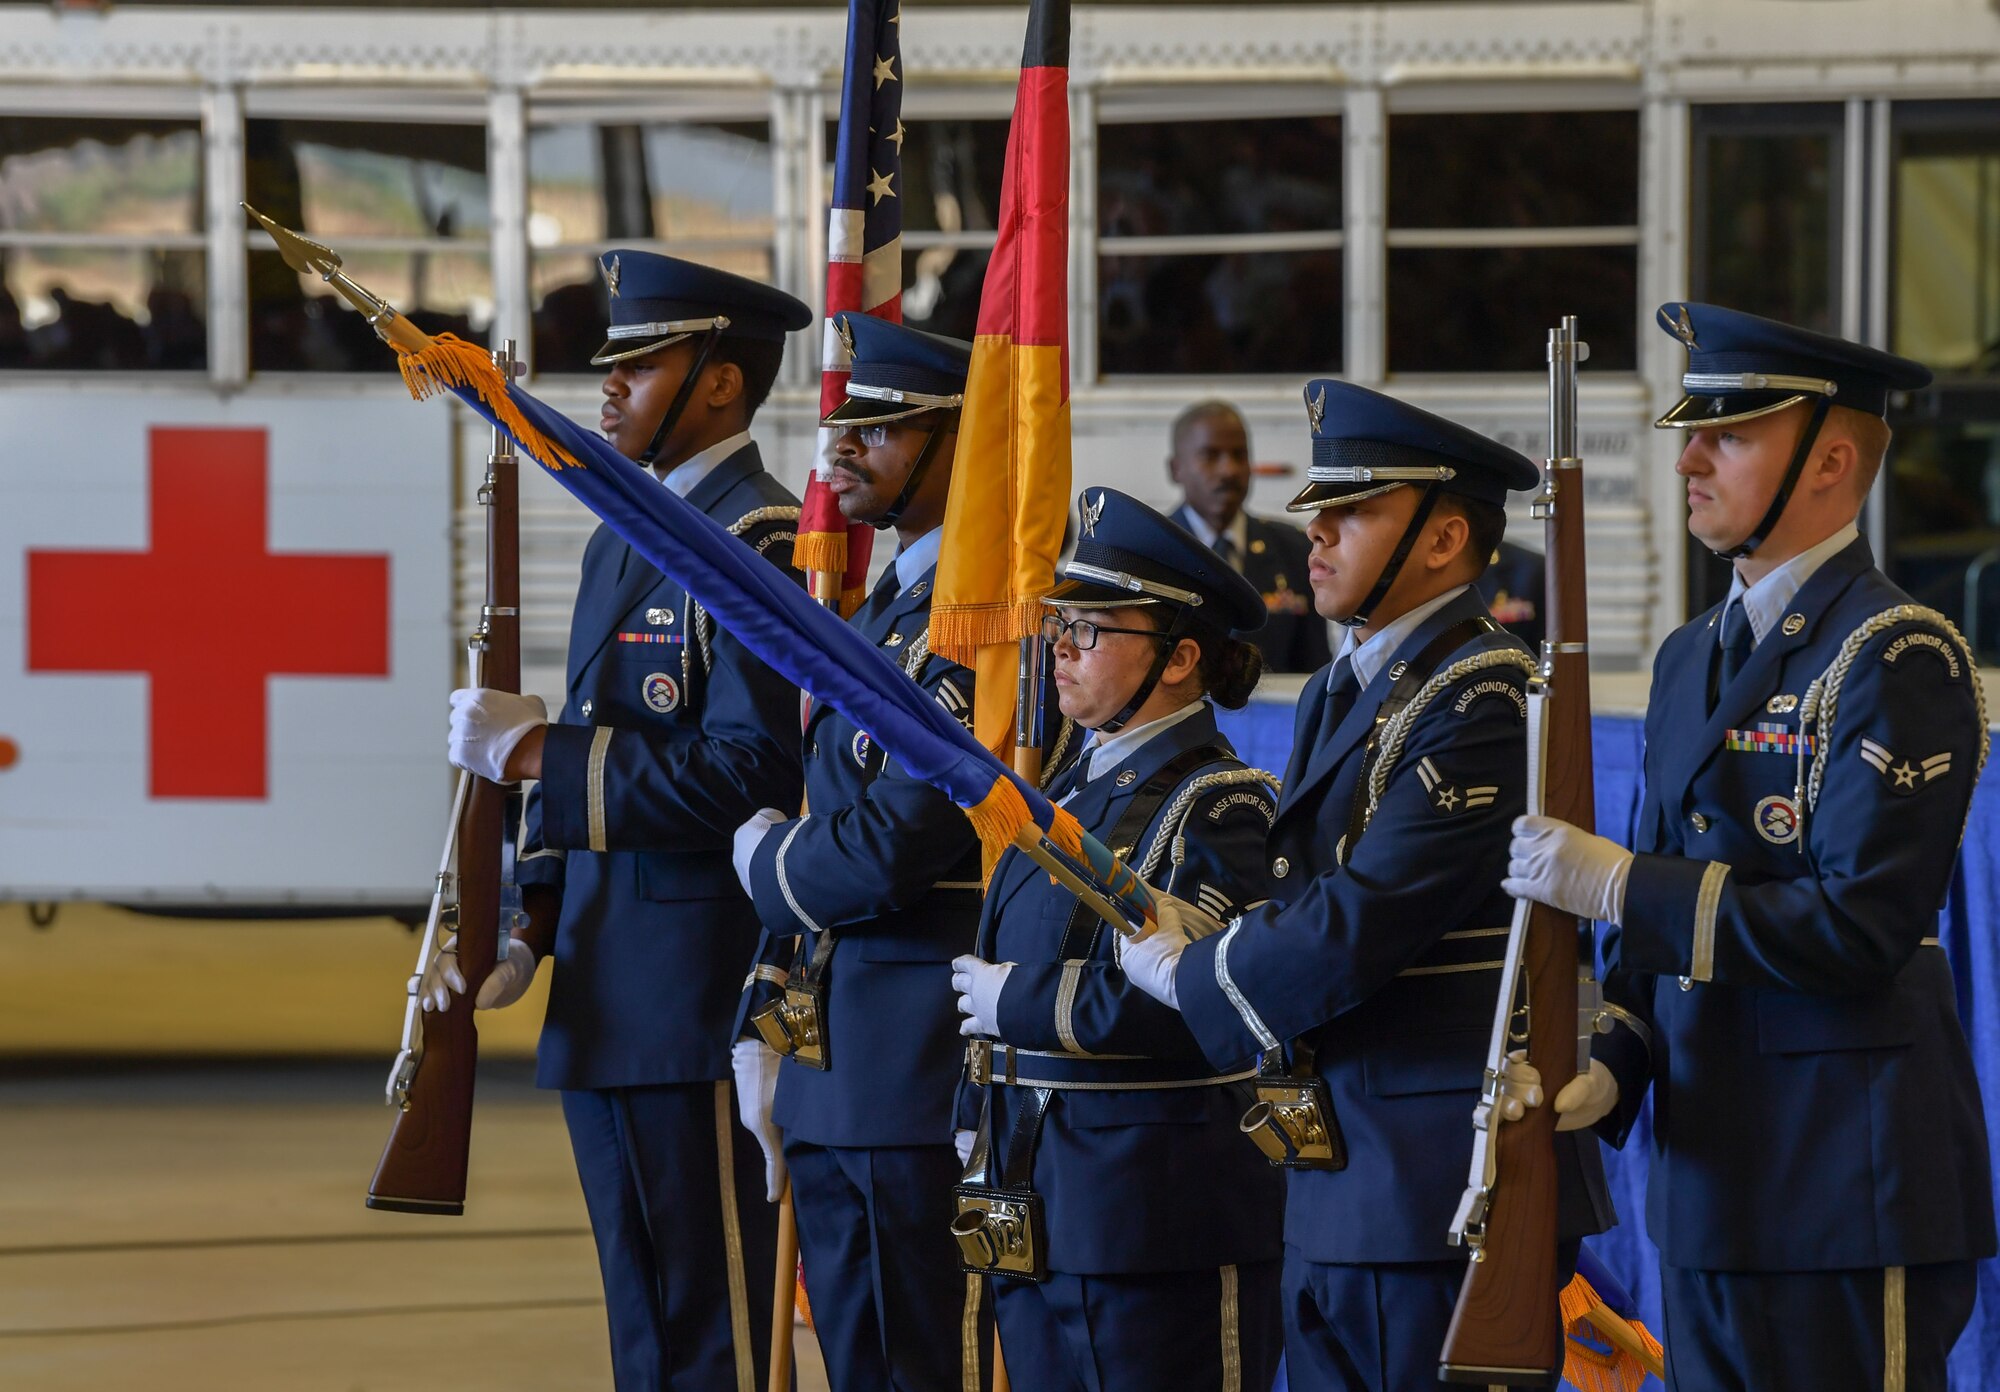 Members of the U.S. Air Force 786th Force Support Squadron’s Honor Guard present the colors at the 86th Medical Group change of command ceremony at Ramstein Air Base, Germany, July 6, 2023. This ceremony signified the transfer of responsibilities from the outgoing commander, Col. Richard McClure, to the incoming commander, Col. Dwayne Baca. (U.S. Air Force photo by Airman Trevor Calvert)